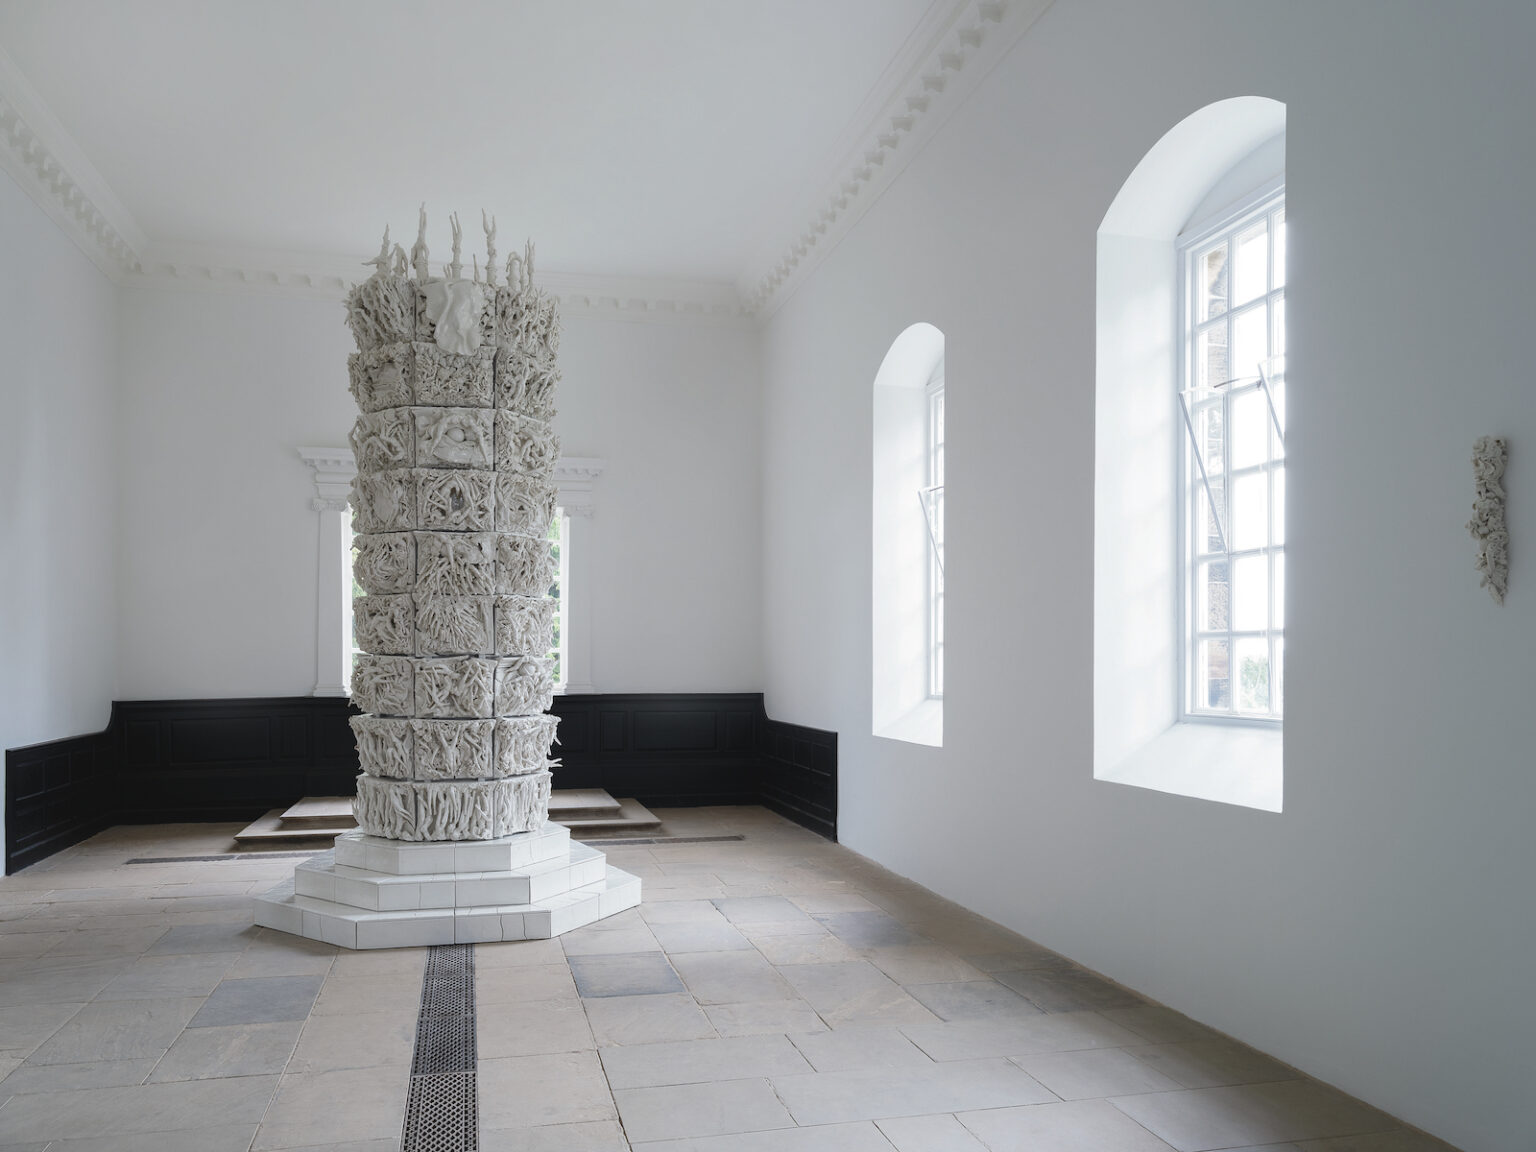 A tall white column on a stepped plinth, covered in delicate sculptures, sits in the middle of a light gallery space with two windows.